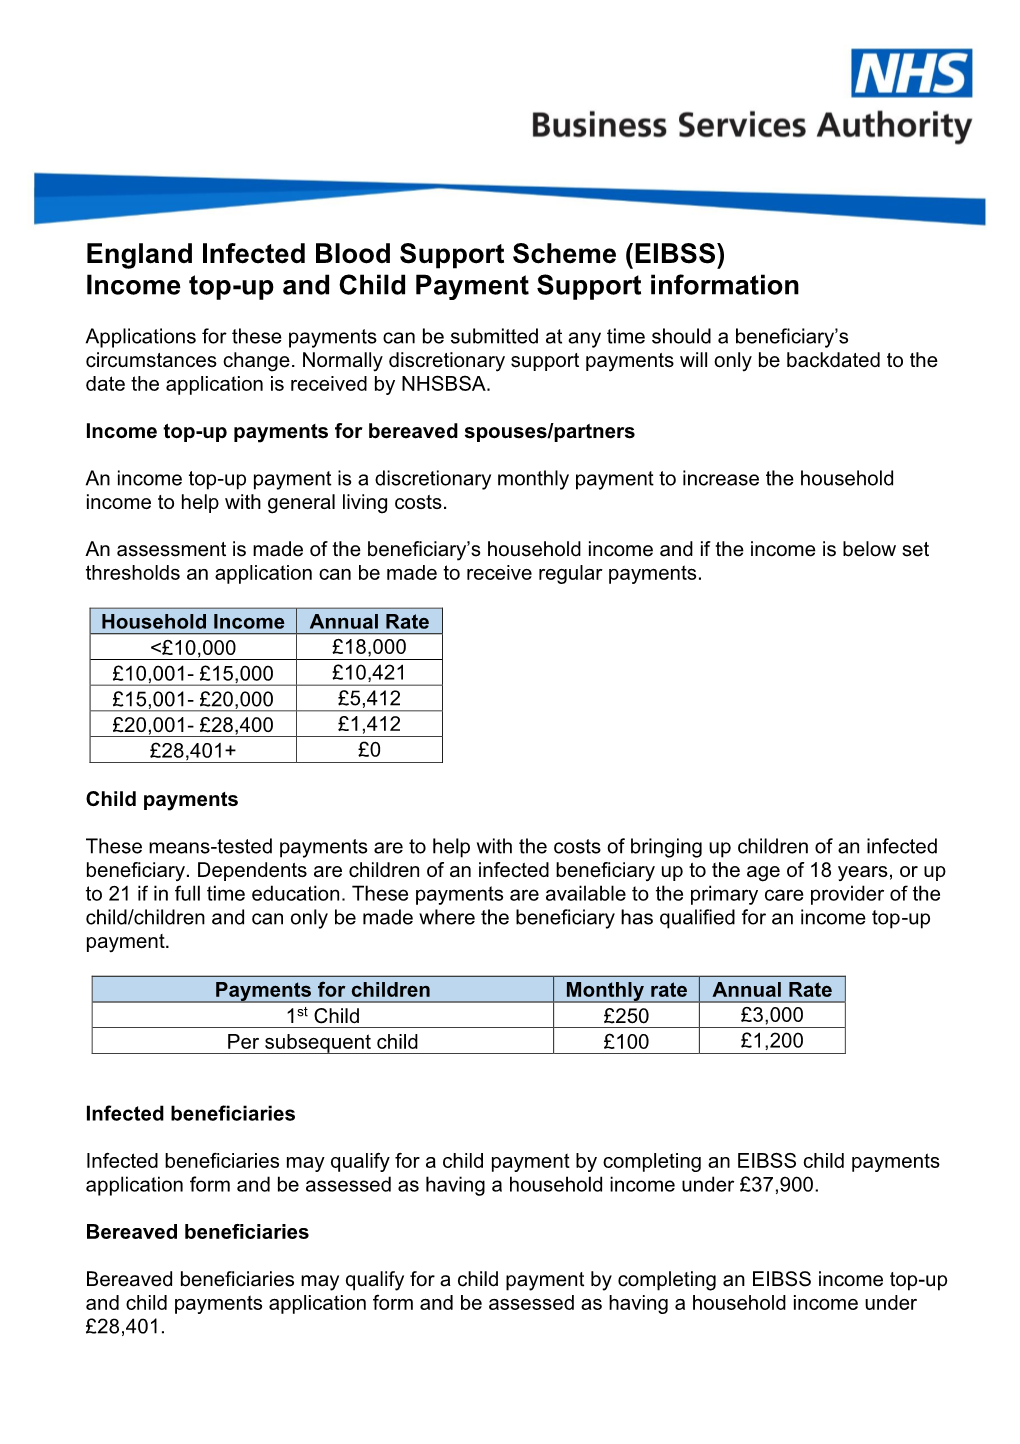 EIBSS) Income Top-Up and Child Payment Support Information